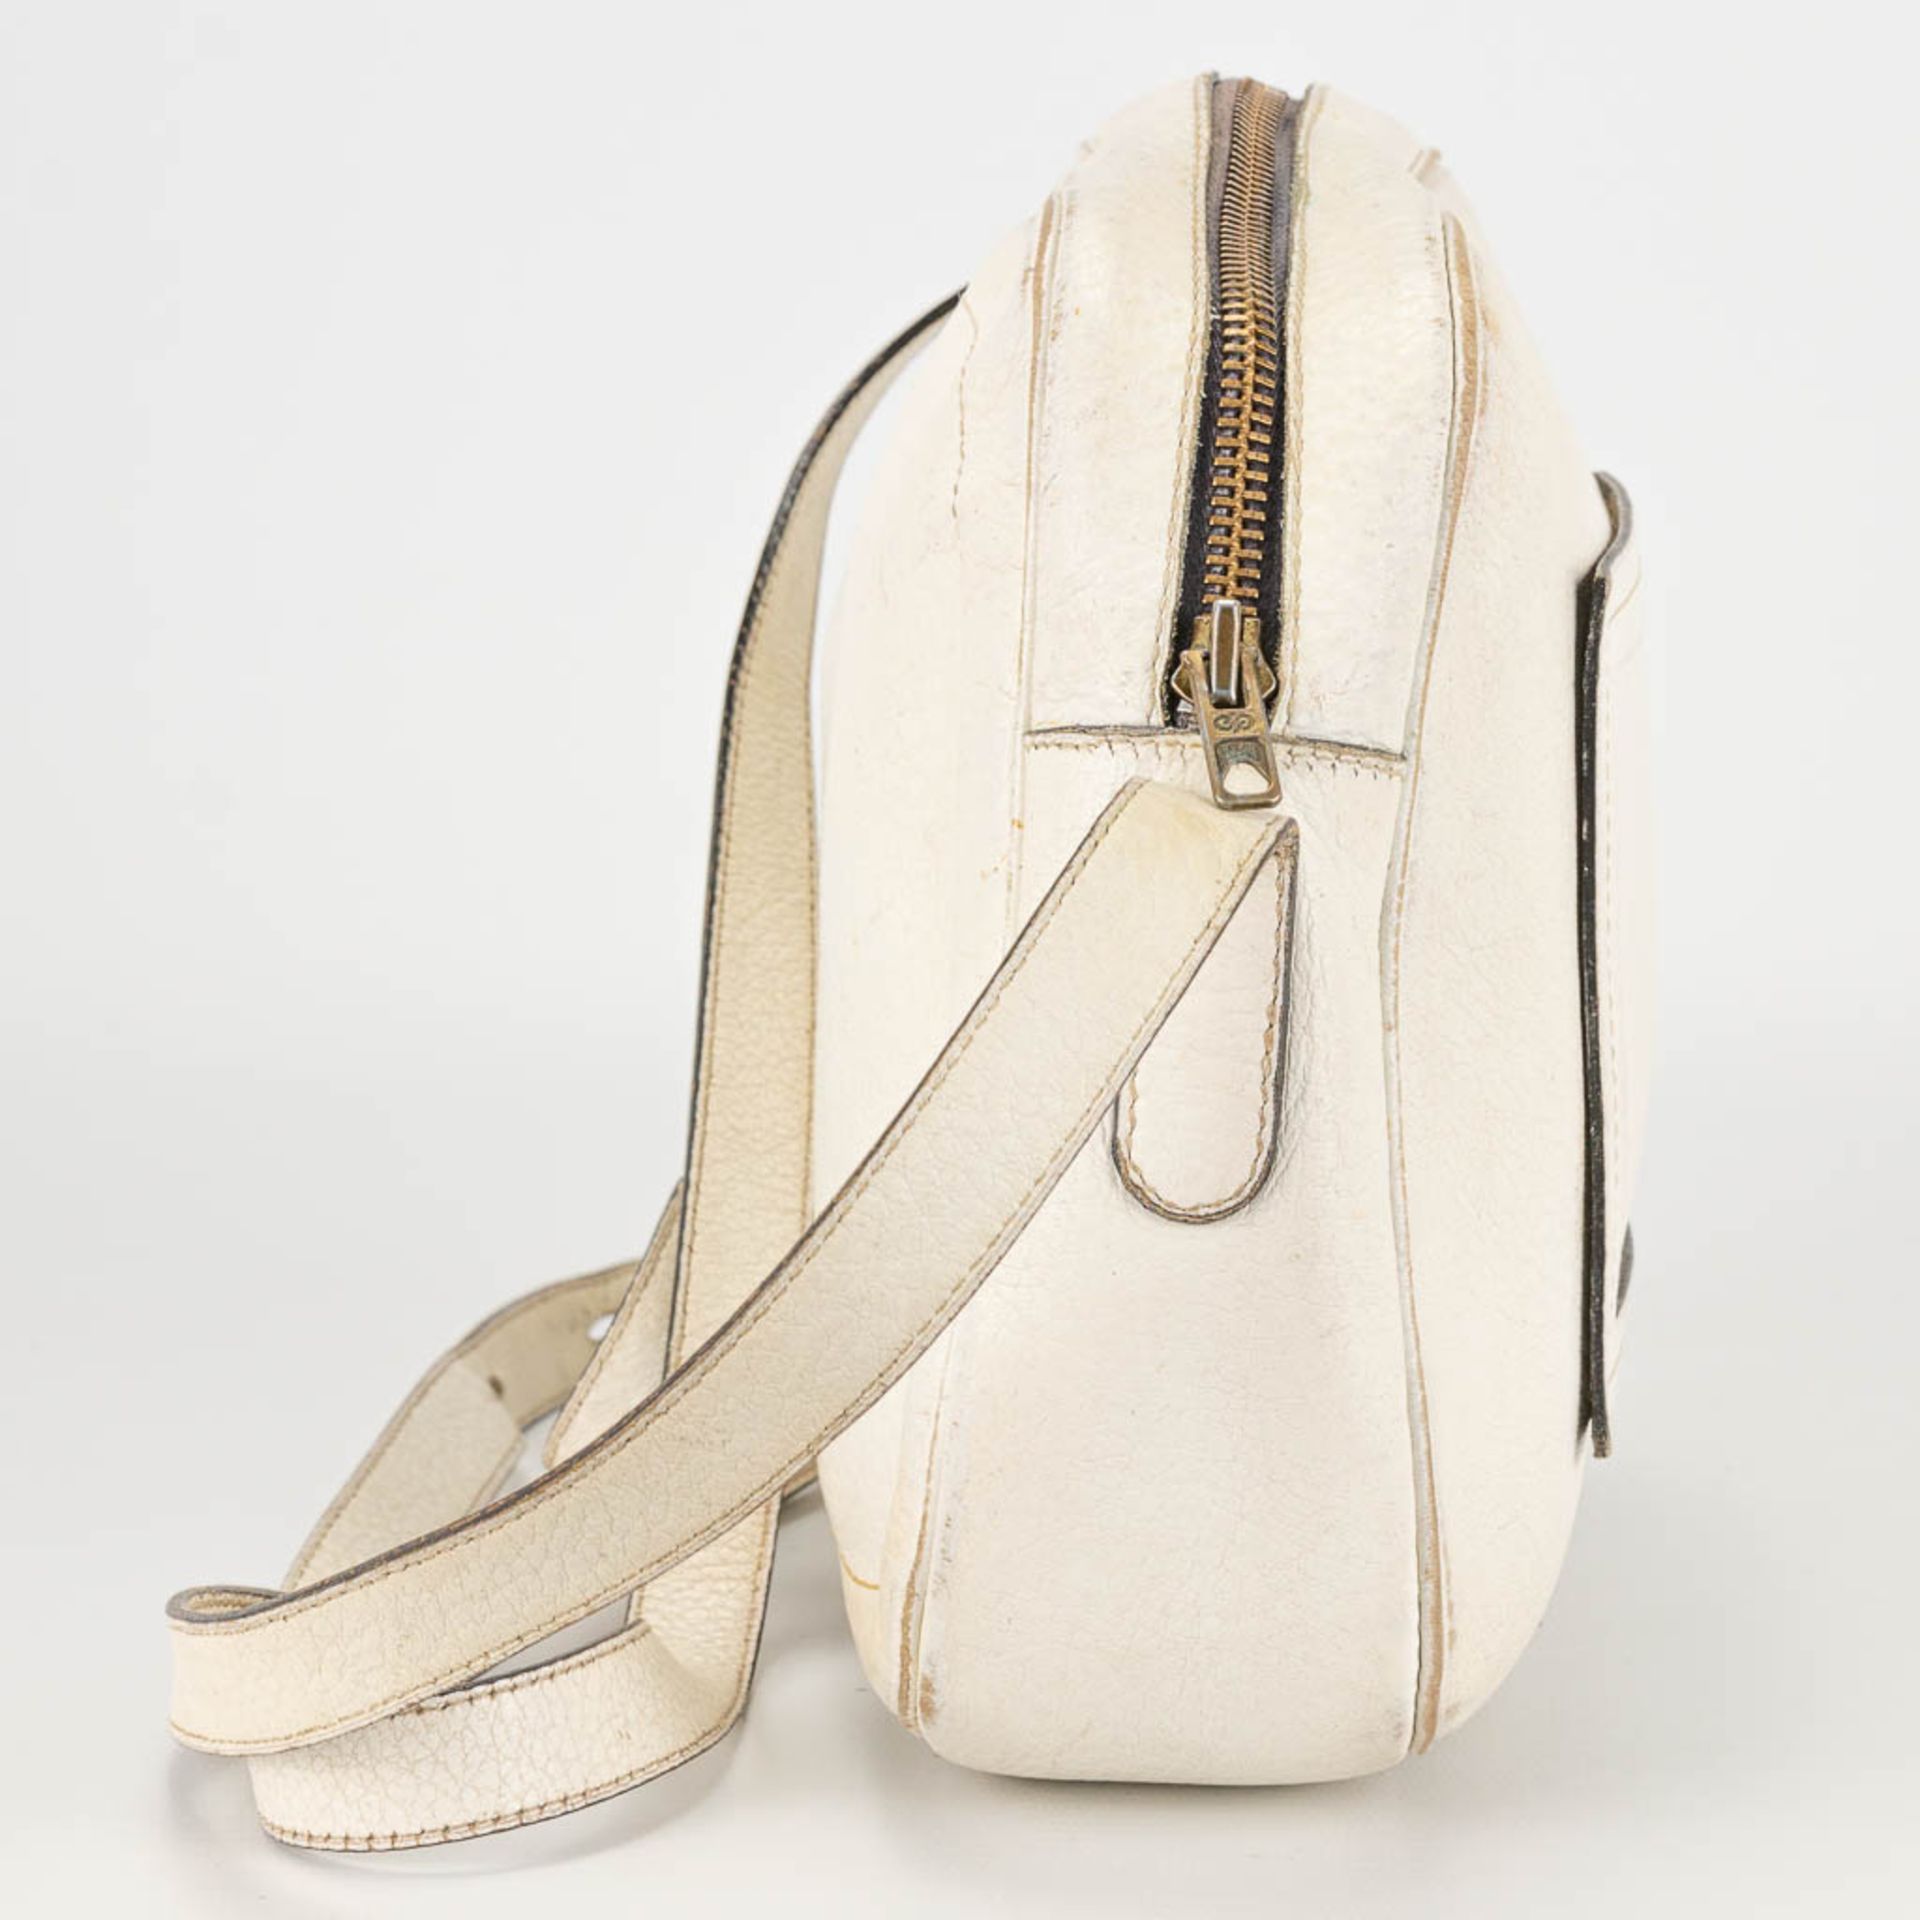 A purse made of white leather and marked Delvaux - Image 8 of 14